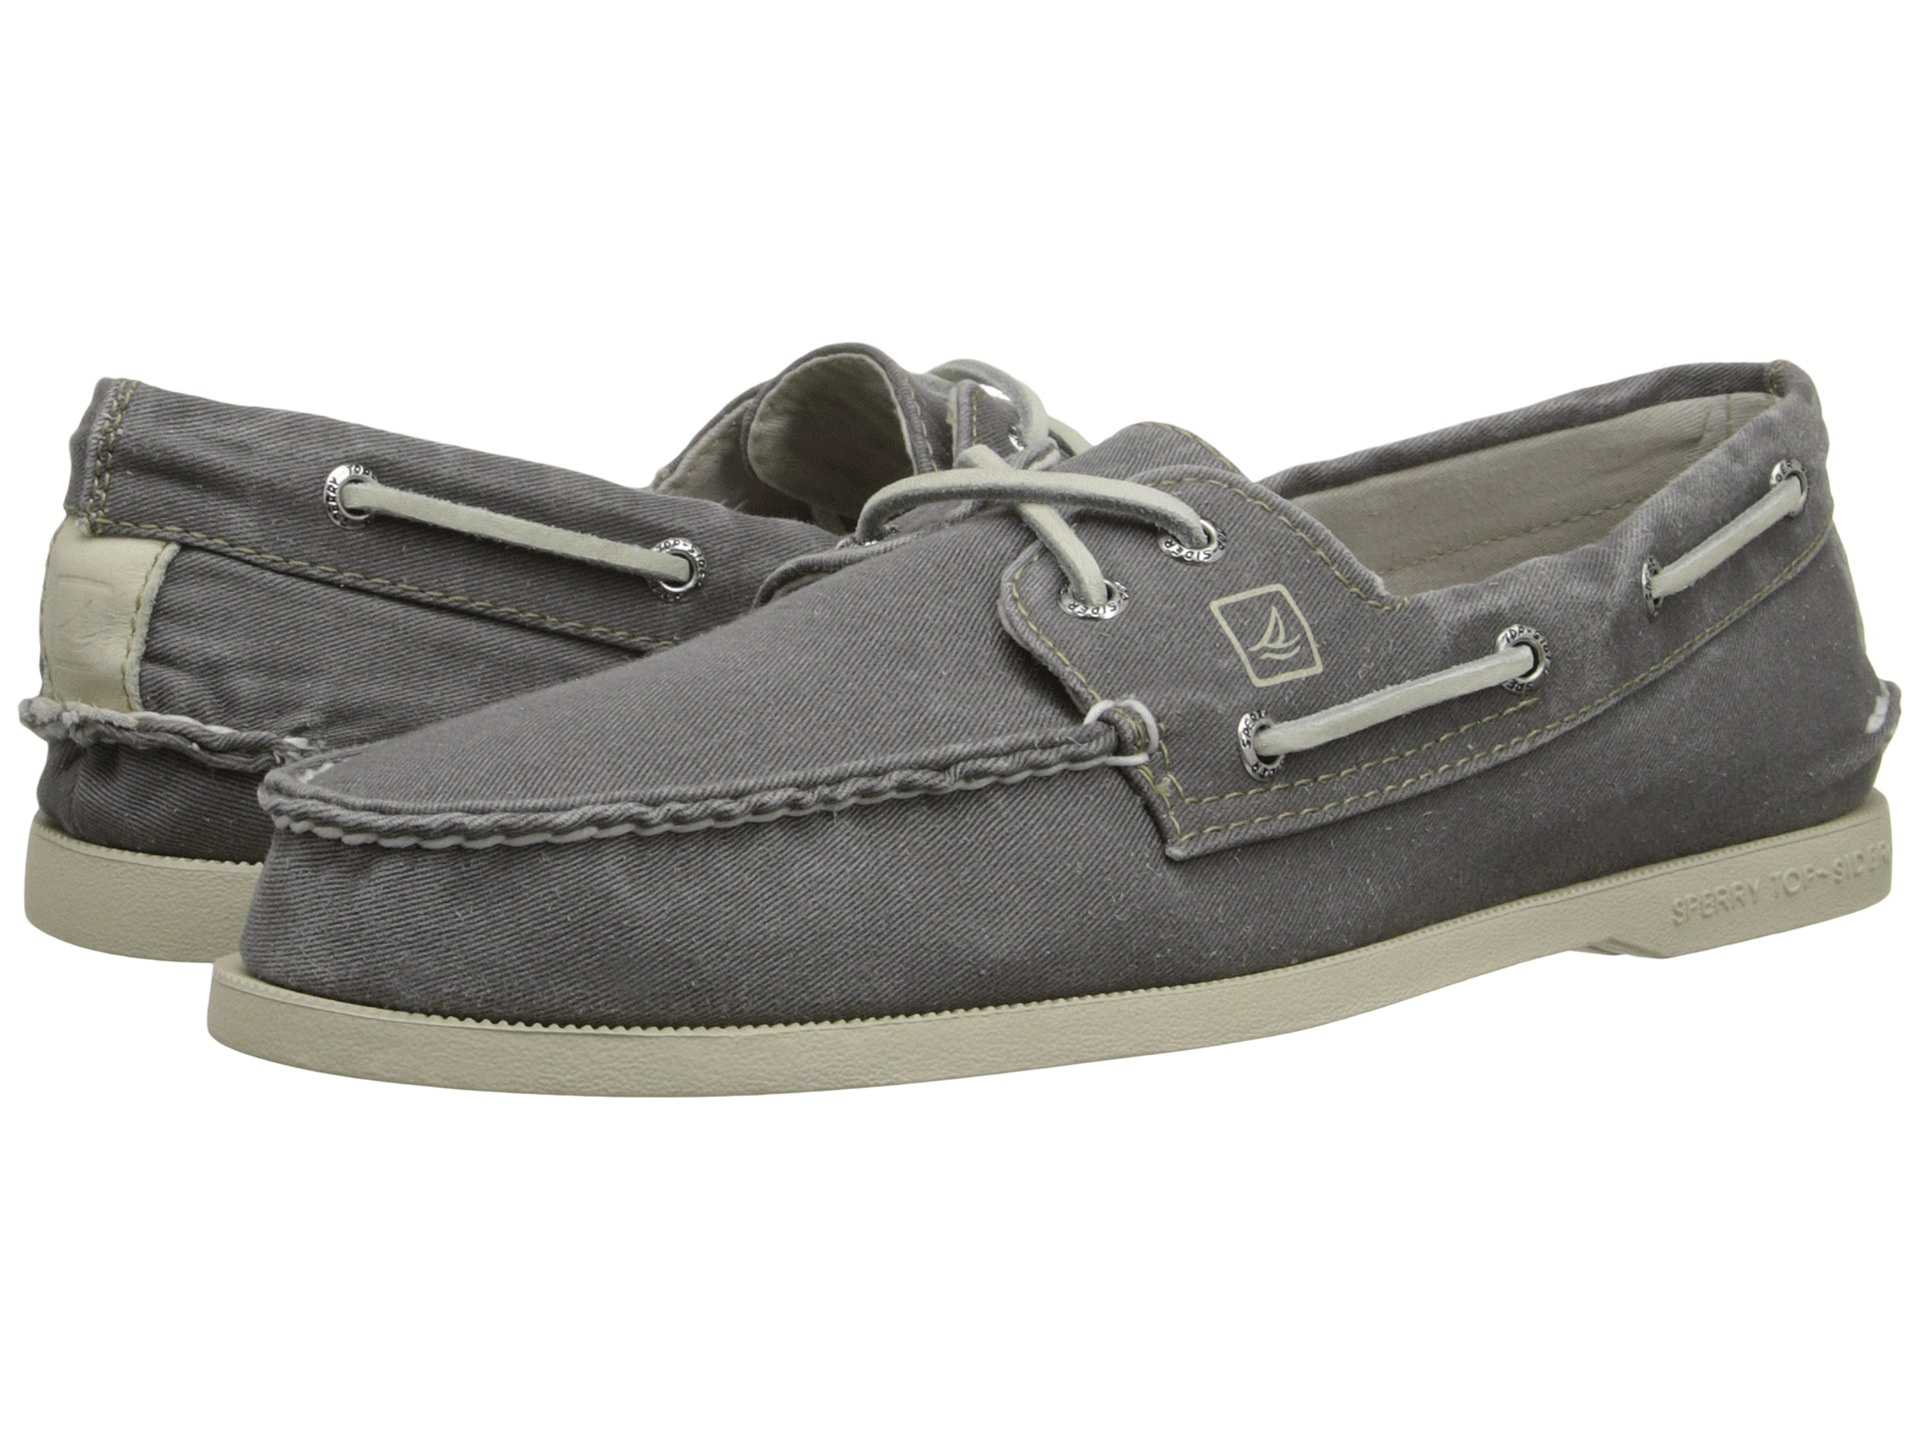 Sperry Top-Sider A/O 2-Eye Sw Canvas in Grey (Gray) for Men - Lyst